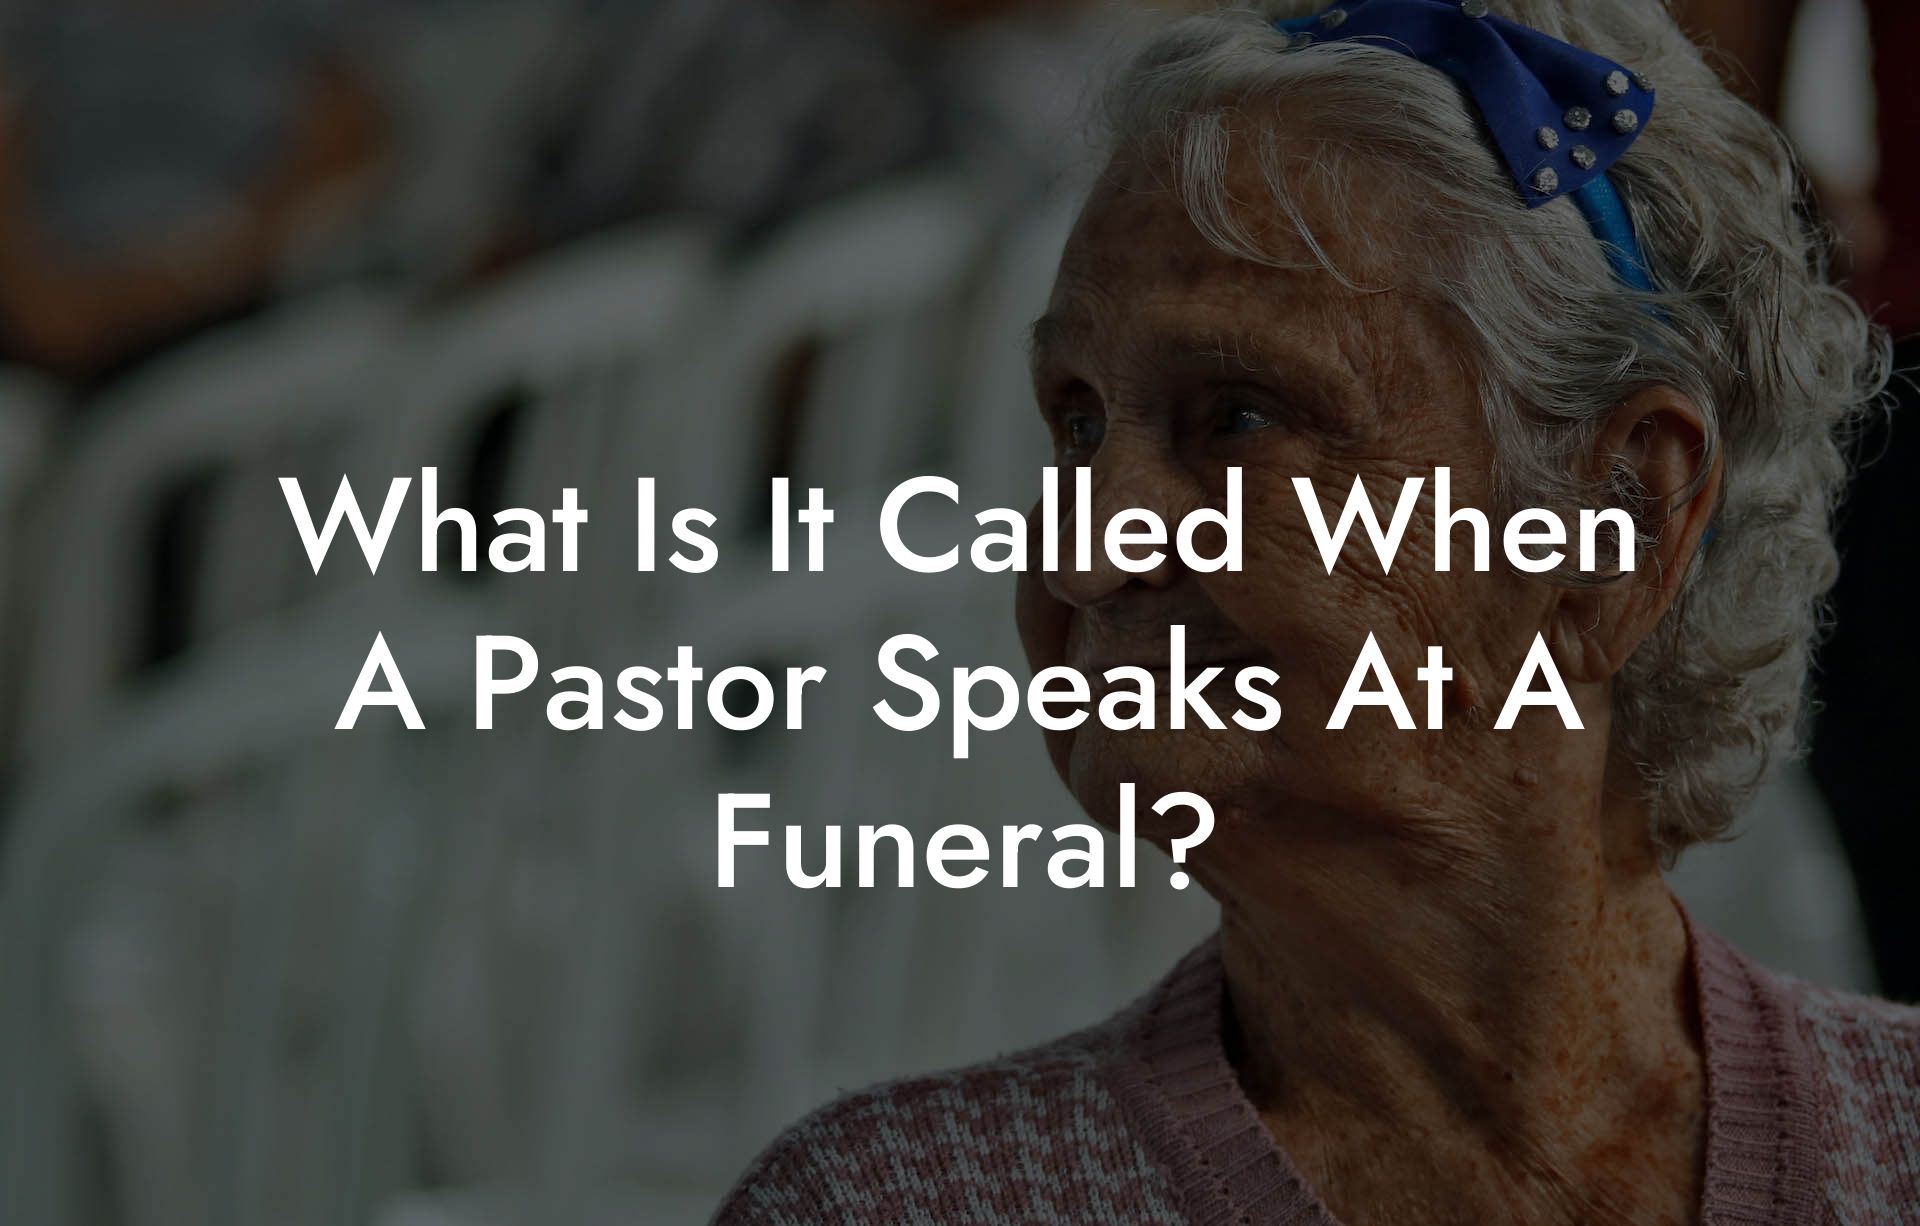 What Is It Called When A Pastor Speaks At A Funeral?